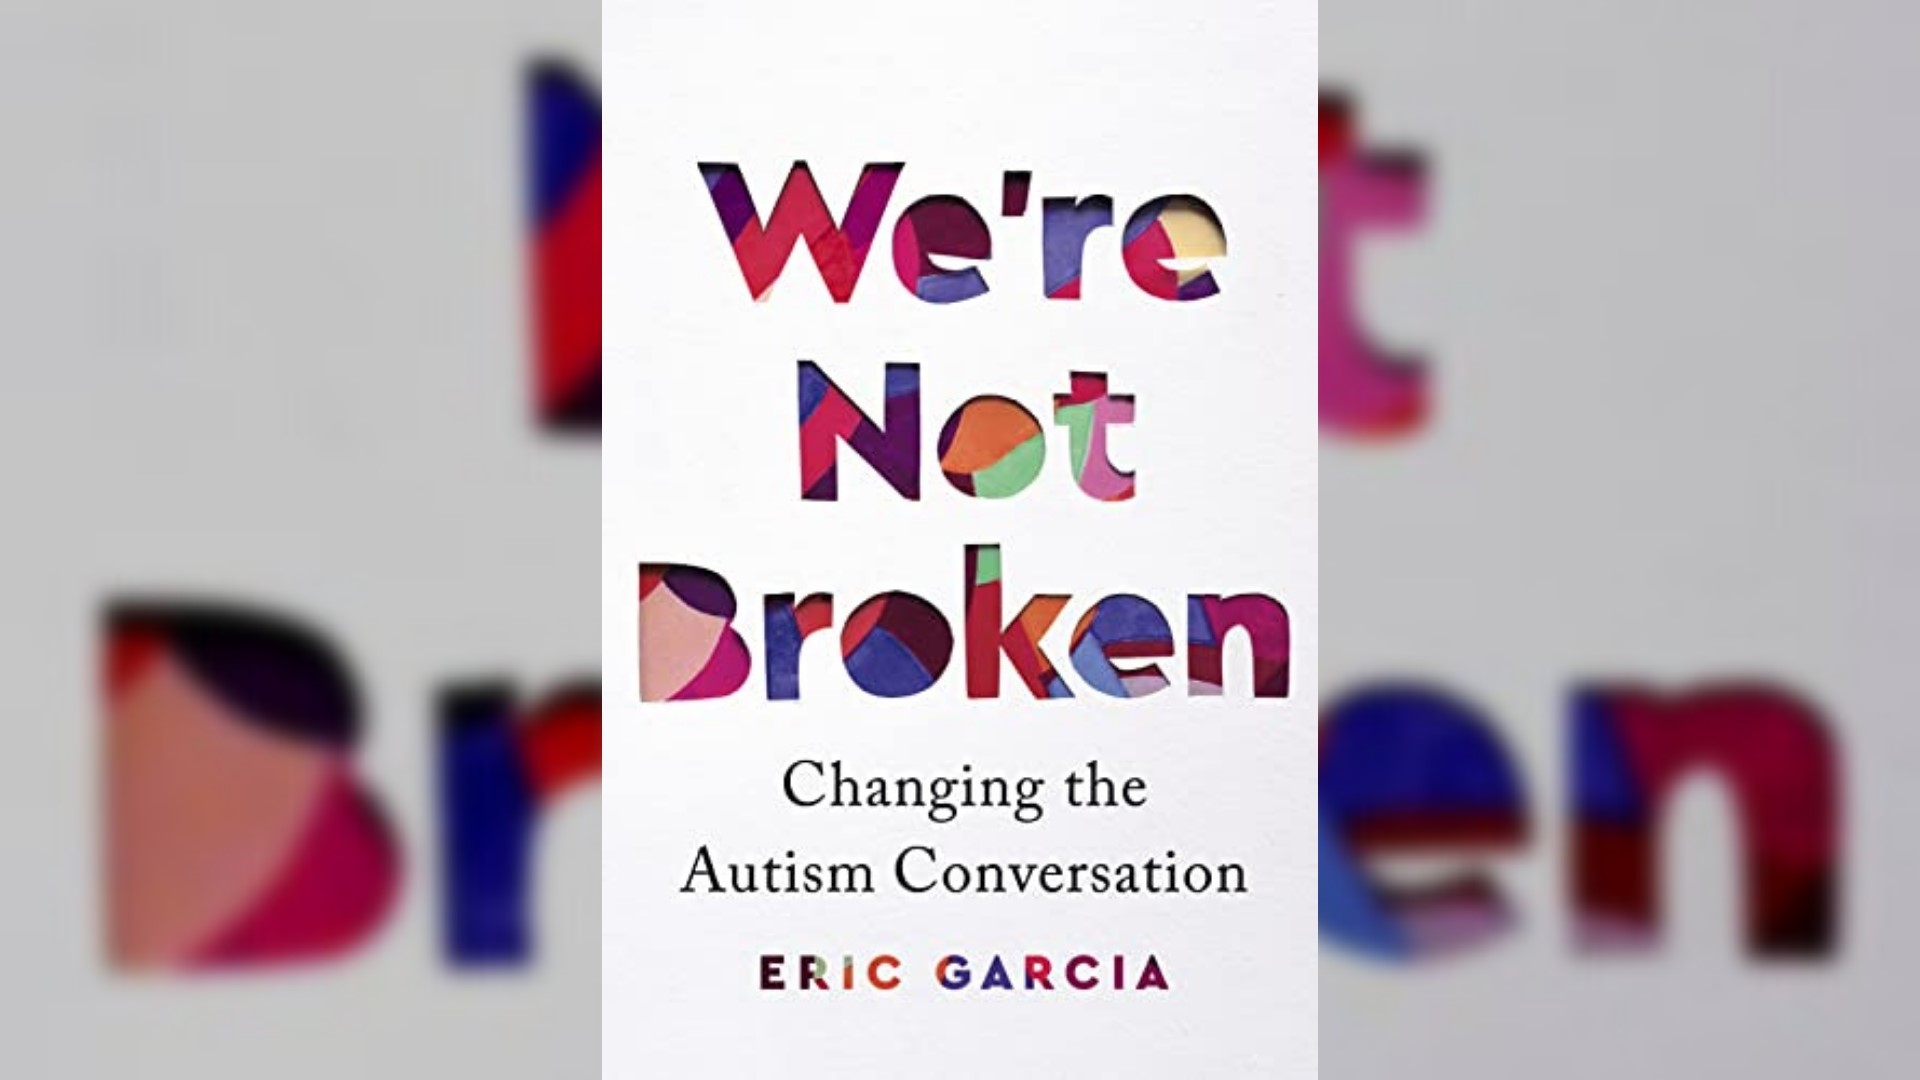 "We're Not Broken" by journalist Eric Garcia dives into misconceptions about autism and steps we should take to change the conversation surrounding it. #newdaynw